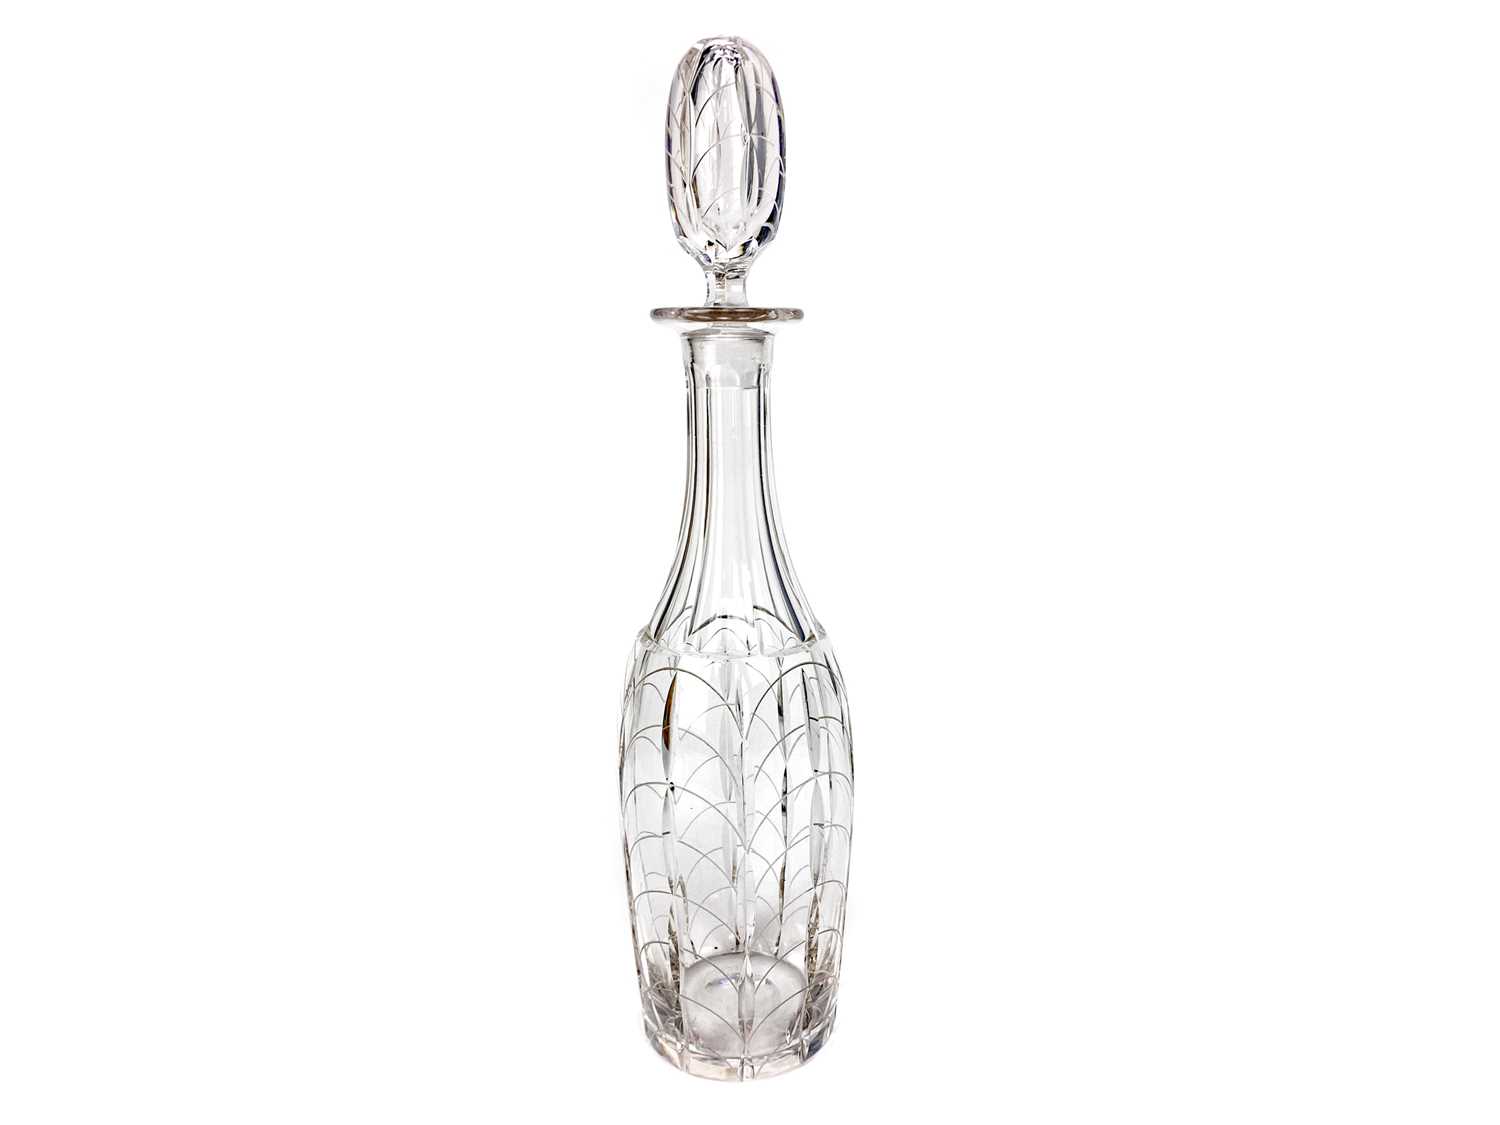 Lot 1020 - A CLYNE FARQUHARSON FOR JOHN WALSH WALSH 'KENDAL' DECANTER AND STOPPER